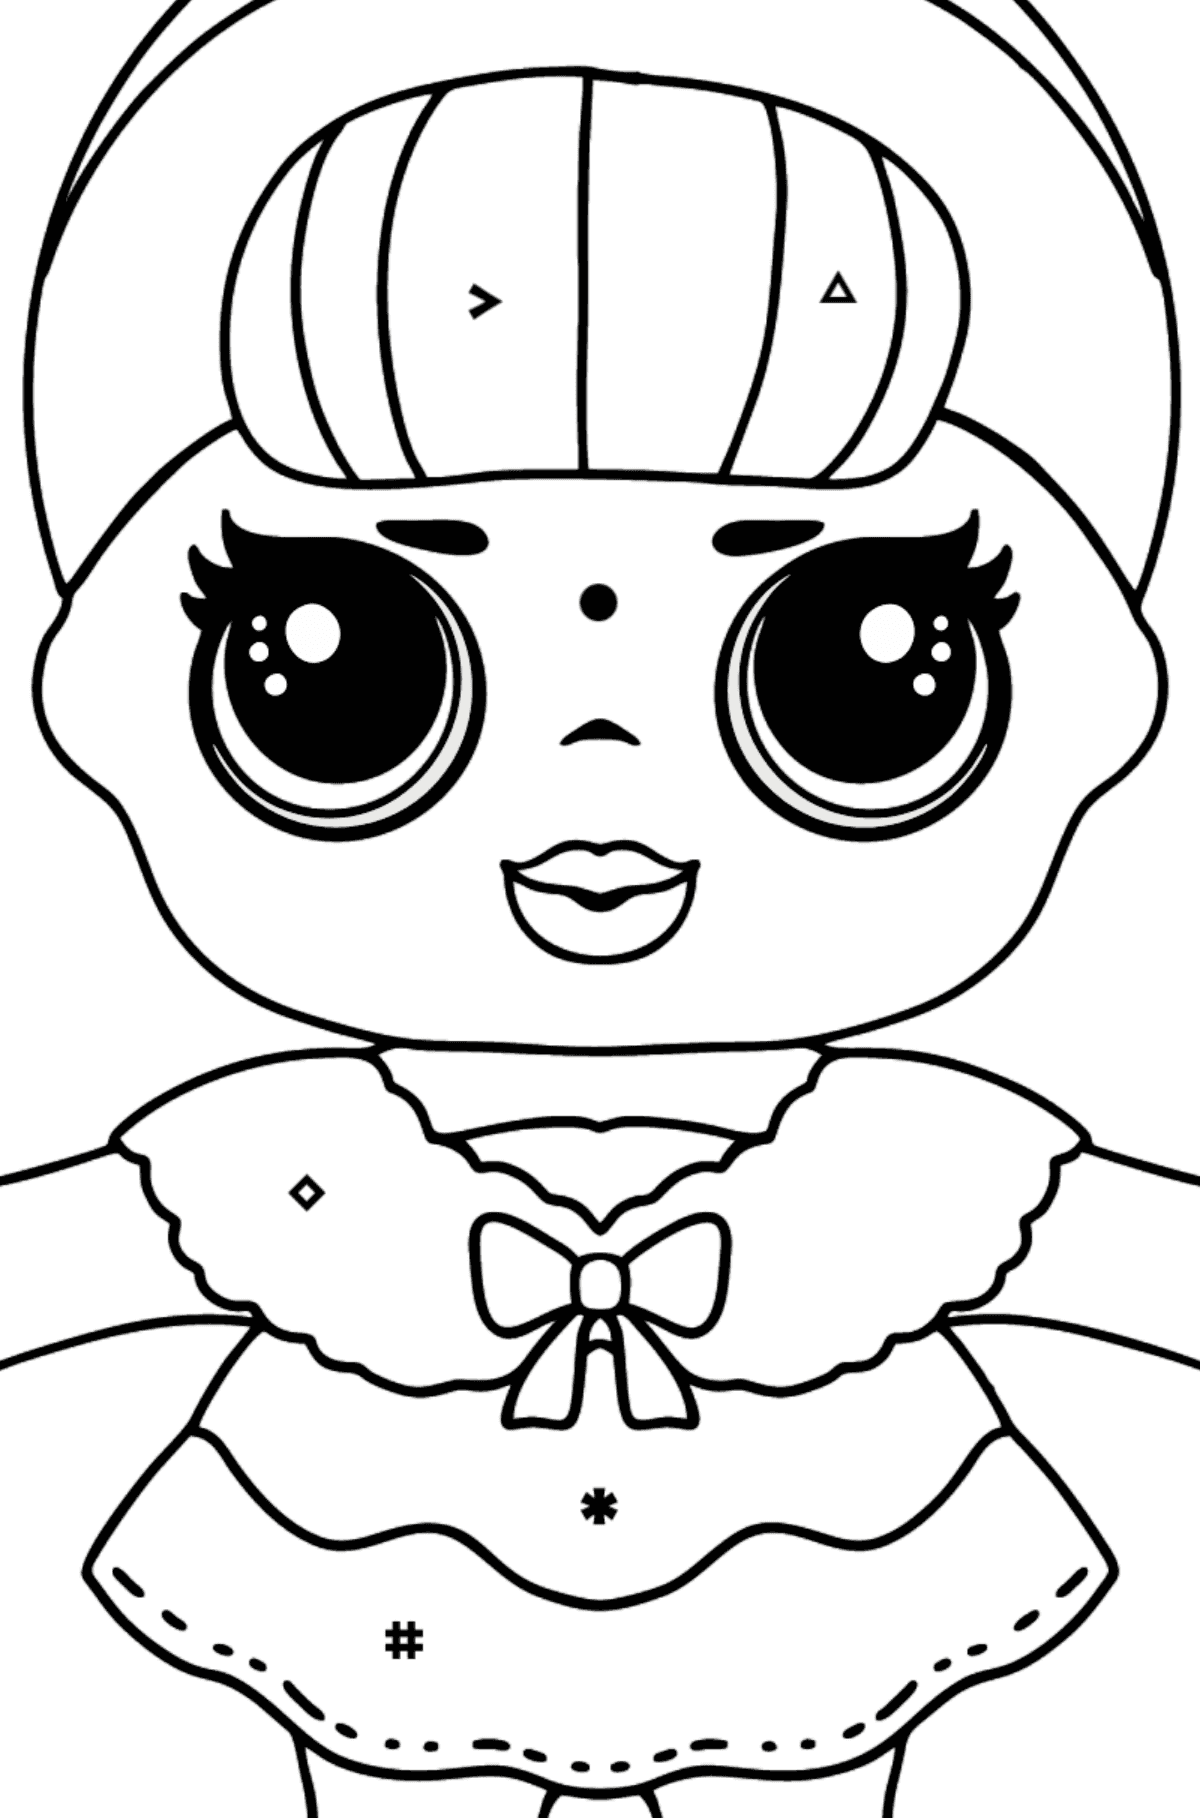 LOL Surprise Doll Crystal Queen - Coloring by Symbols for Kids